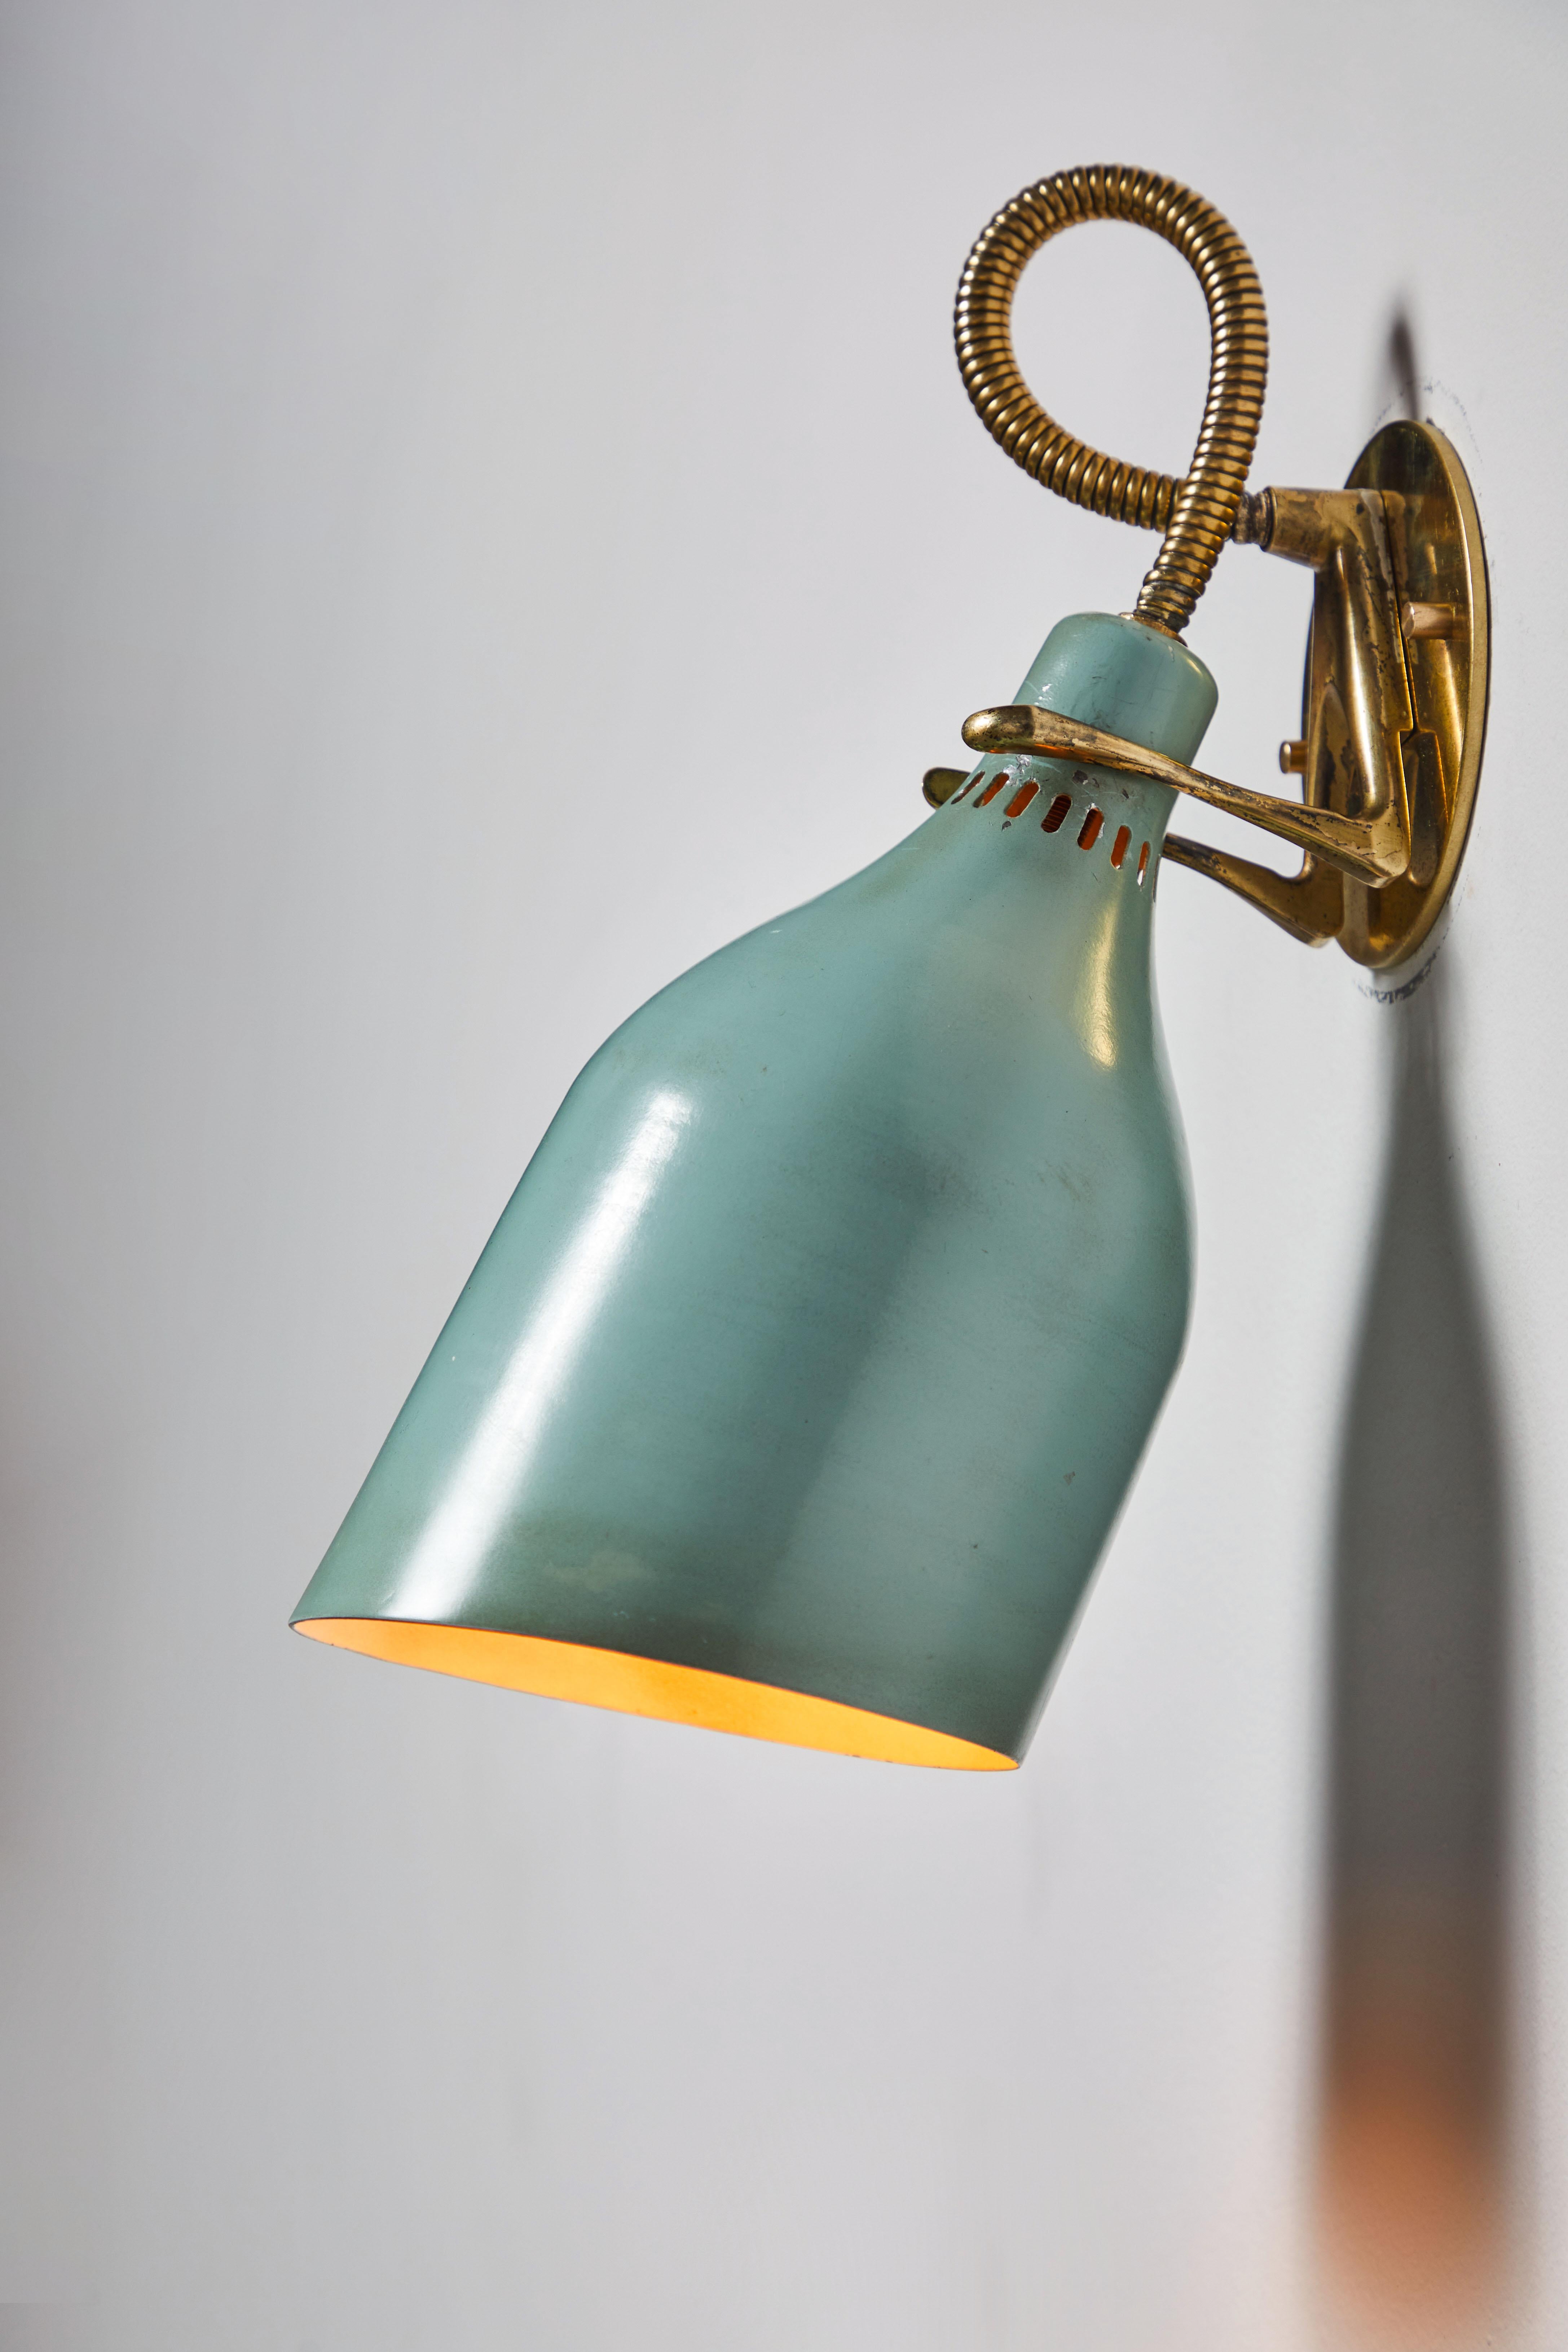 Model B2 Faretto single sconce by Giuseppe Ostuni for Oluce. Designed and manufactured in Italy, circa 1950s. Painted metal, brass. Custom brass back plate. Rewired for U.S. standards. Sconce can adjust to various positions via the gooseneck stem.